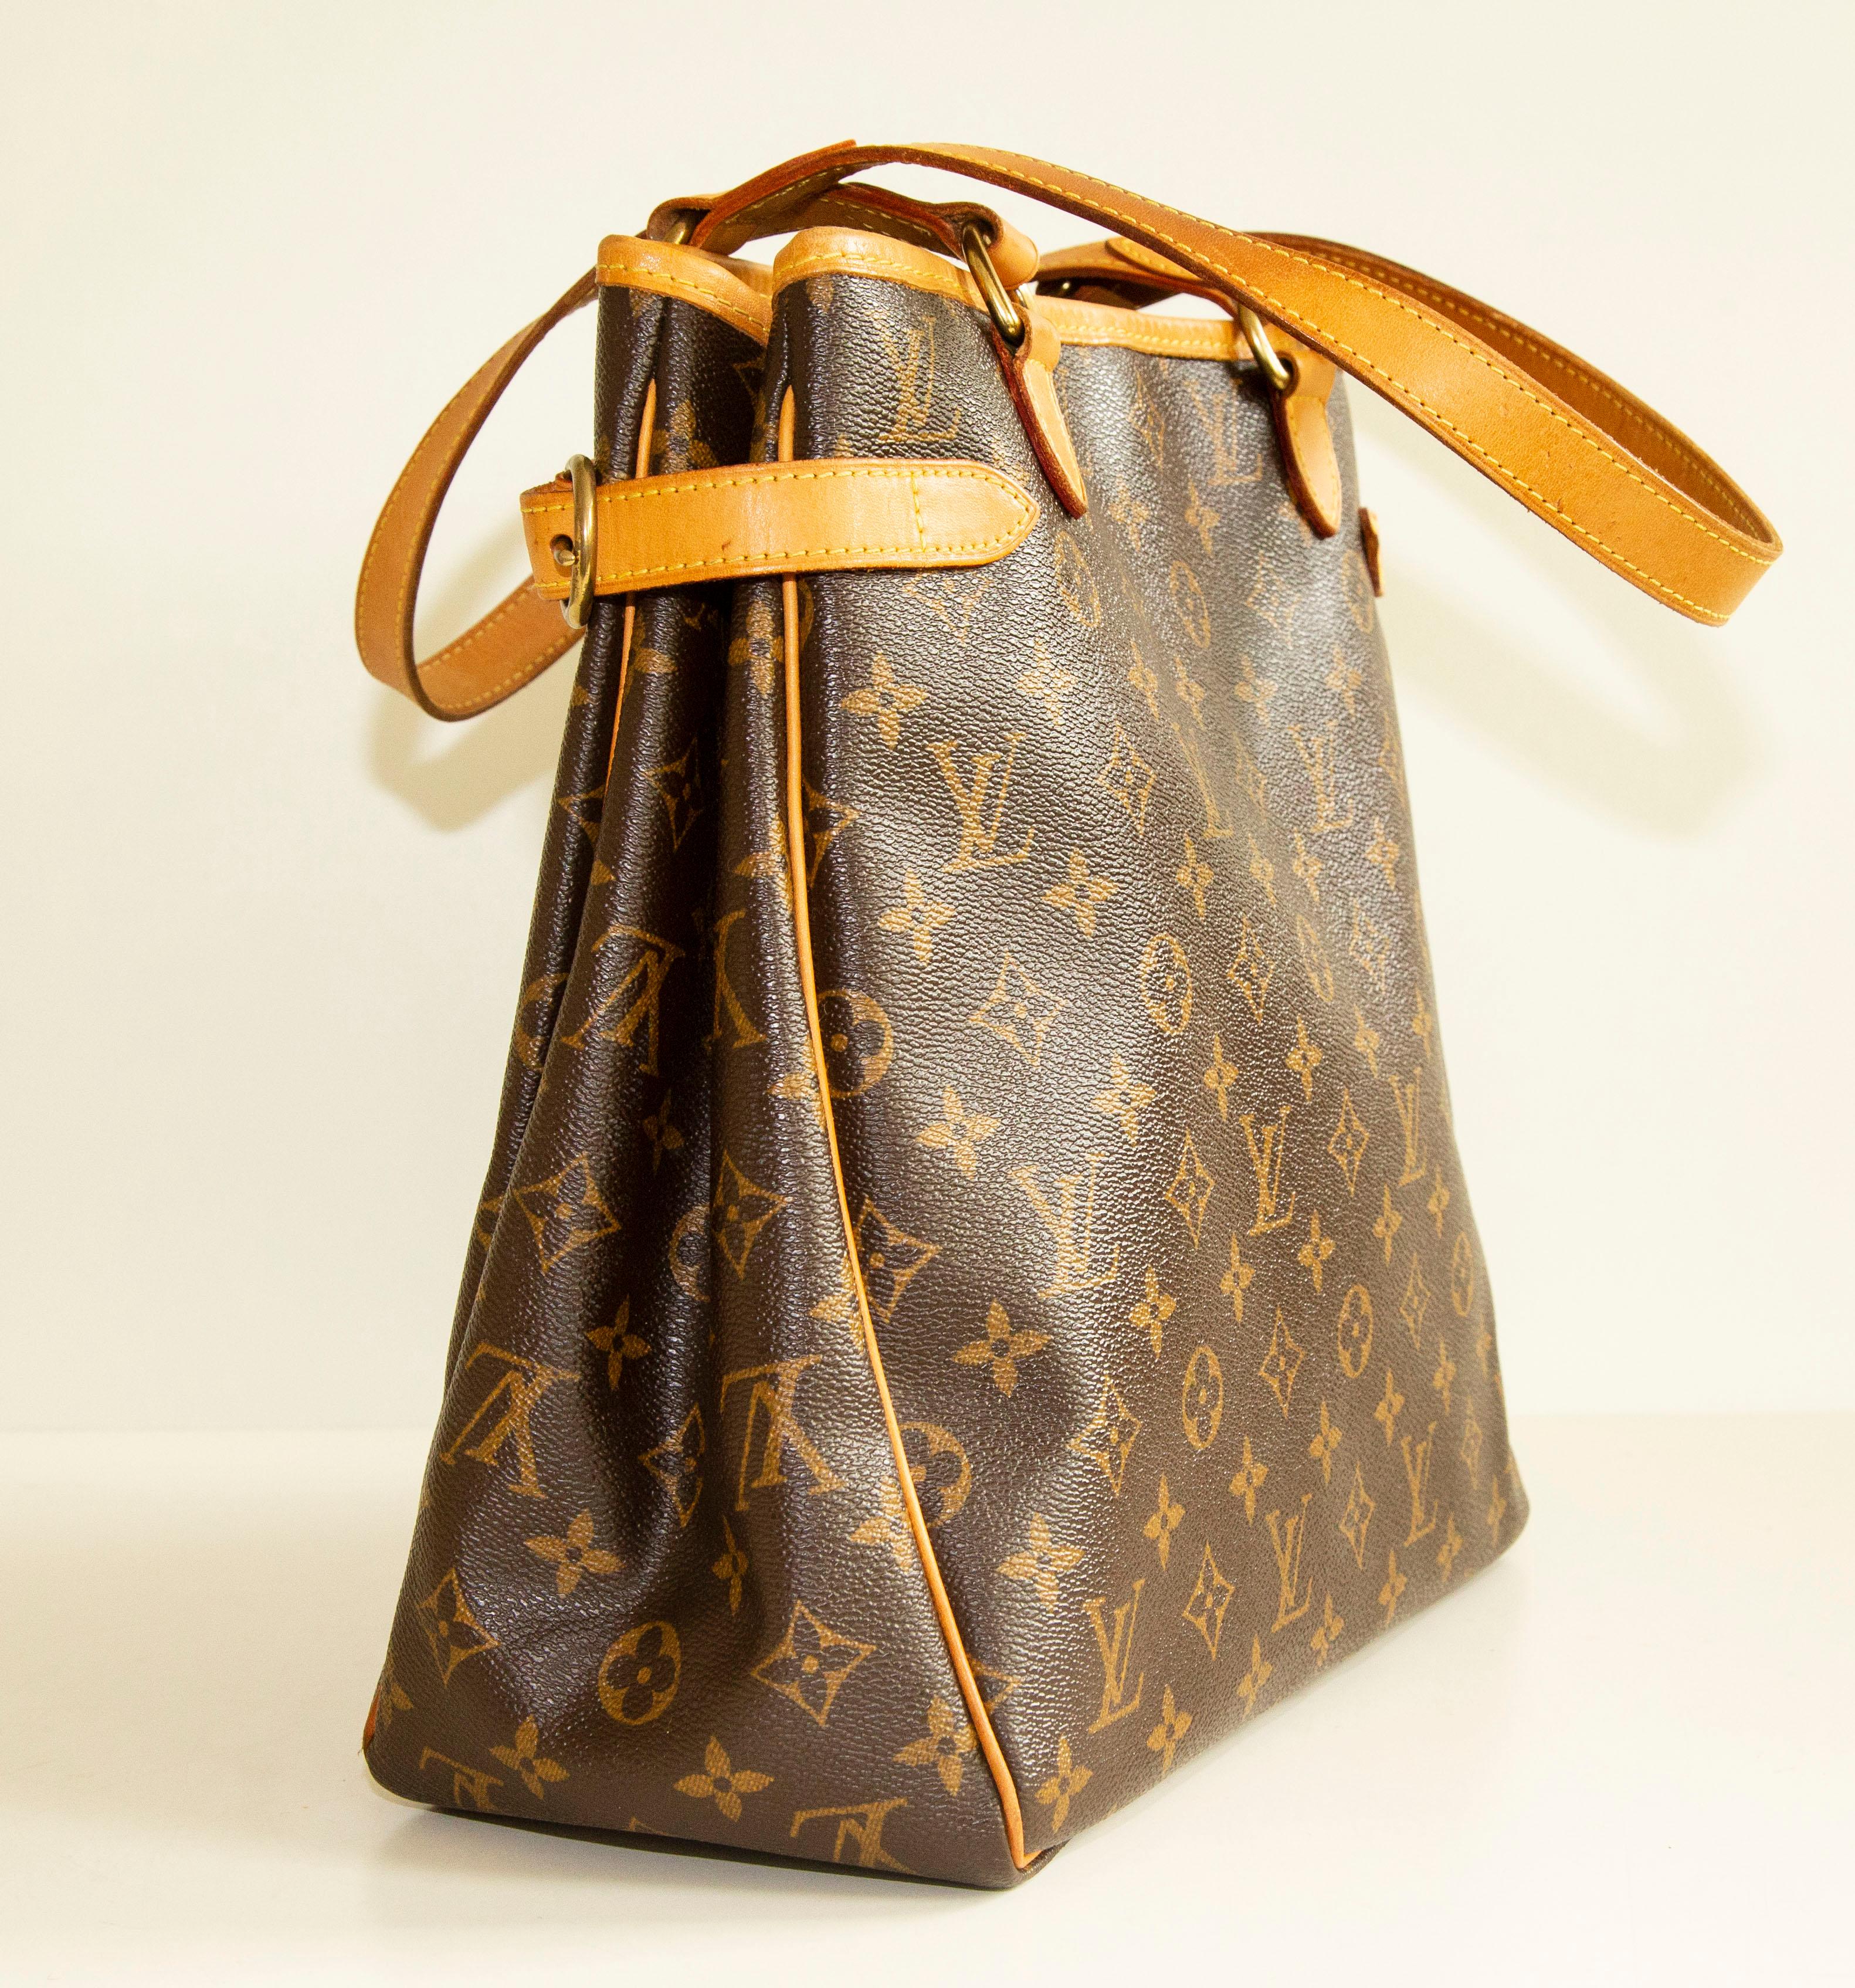 An authentic Louis Vuitton Batignolles vertical shoulder bag. The bag features an LV monogram canvas, Vachetta leather trim, and gold-toned hardware. The interior is lined with brown fabric and there are two side pockets, one slip pocket and one